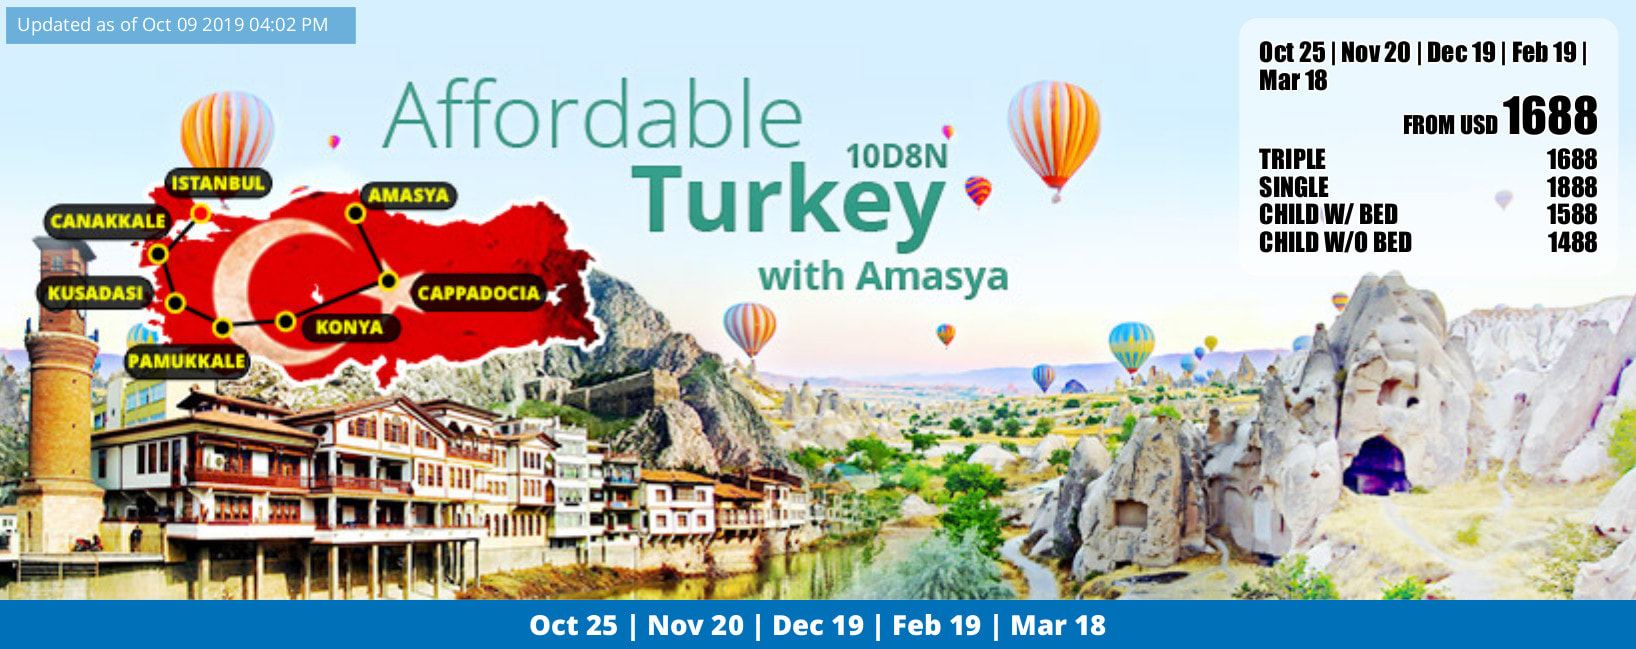 affordable turkey 2019-2020 flyer. click for detailed itinerary in jpg file